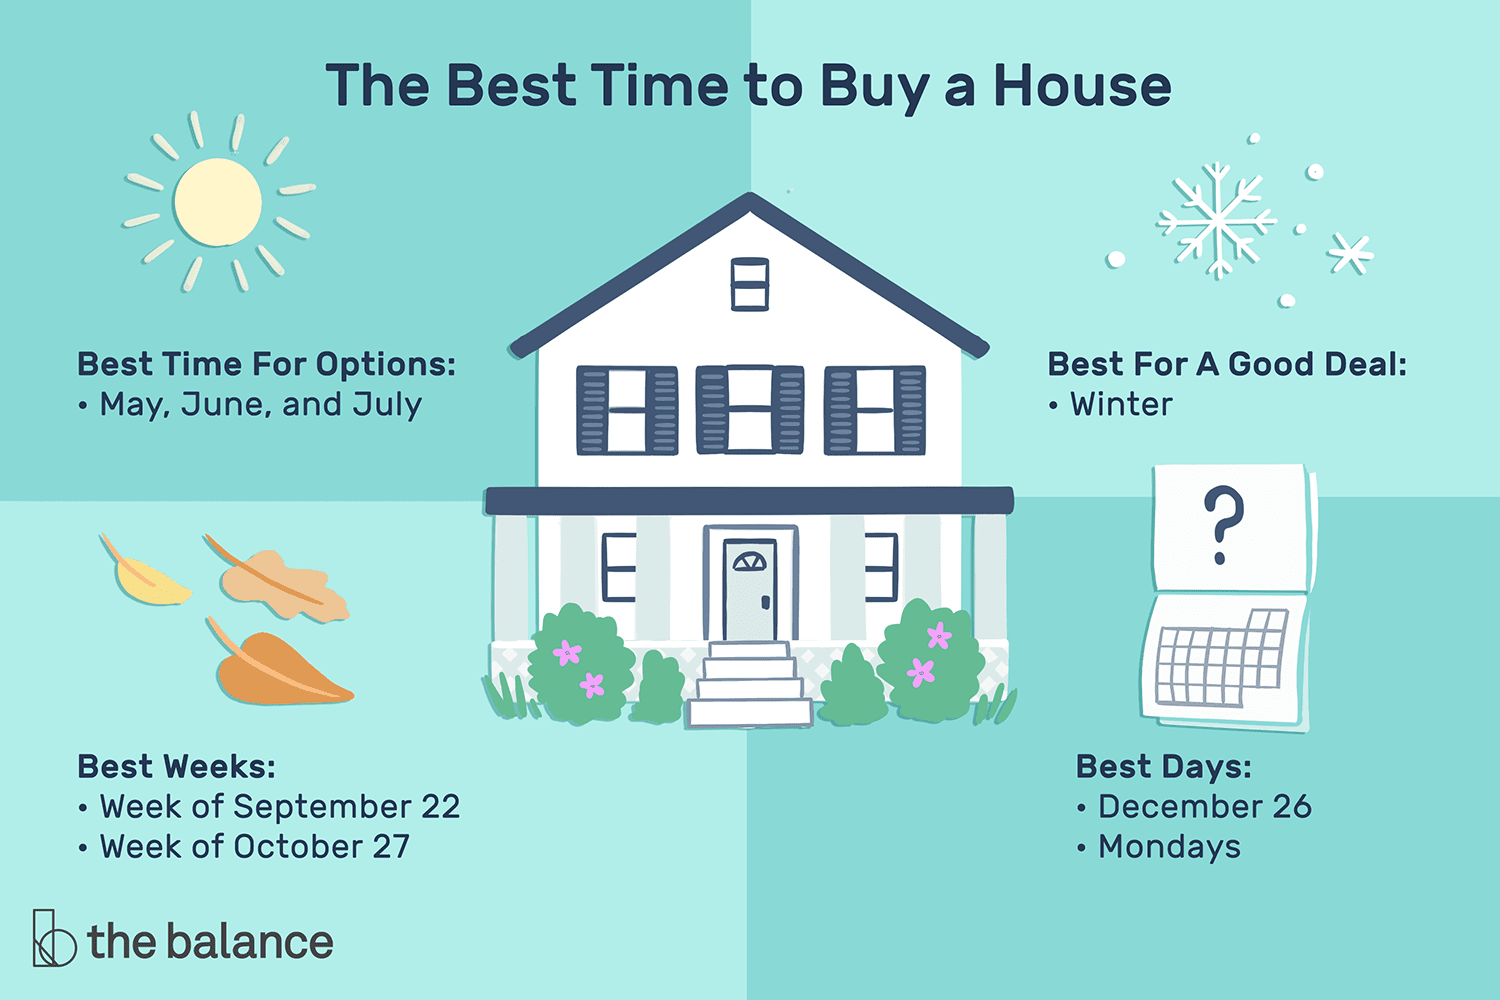 What Is The Best Day To Buy A House